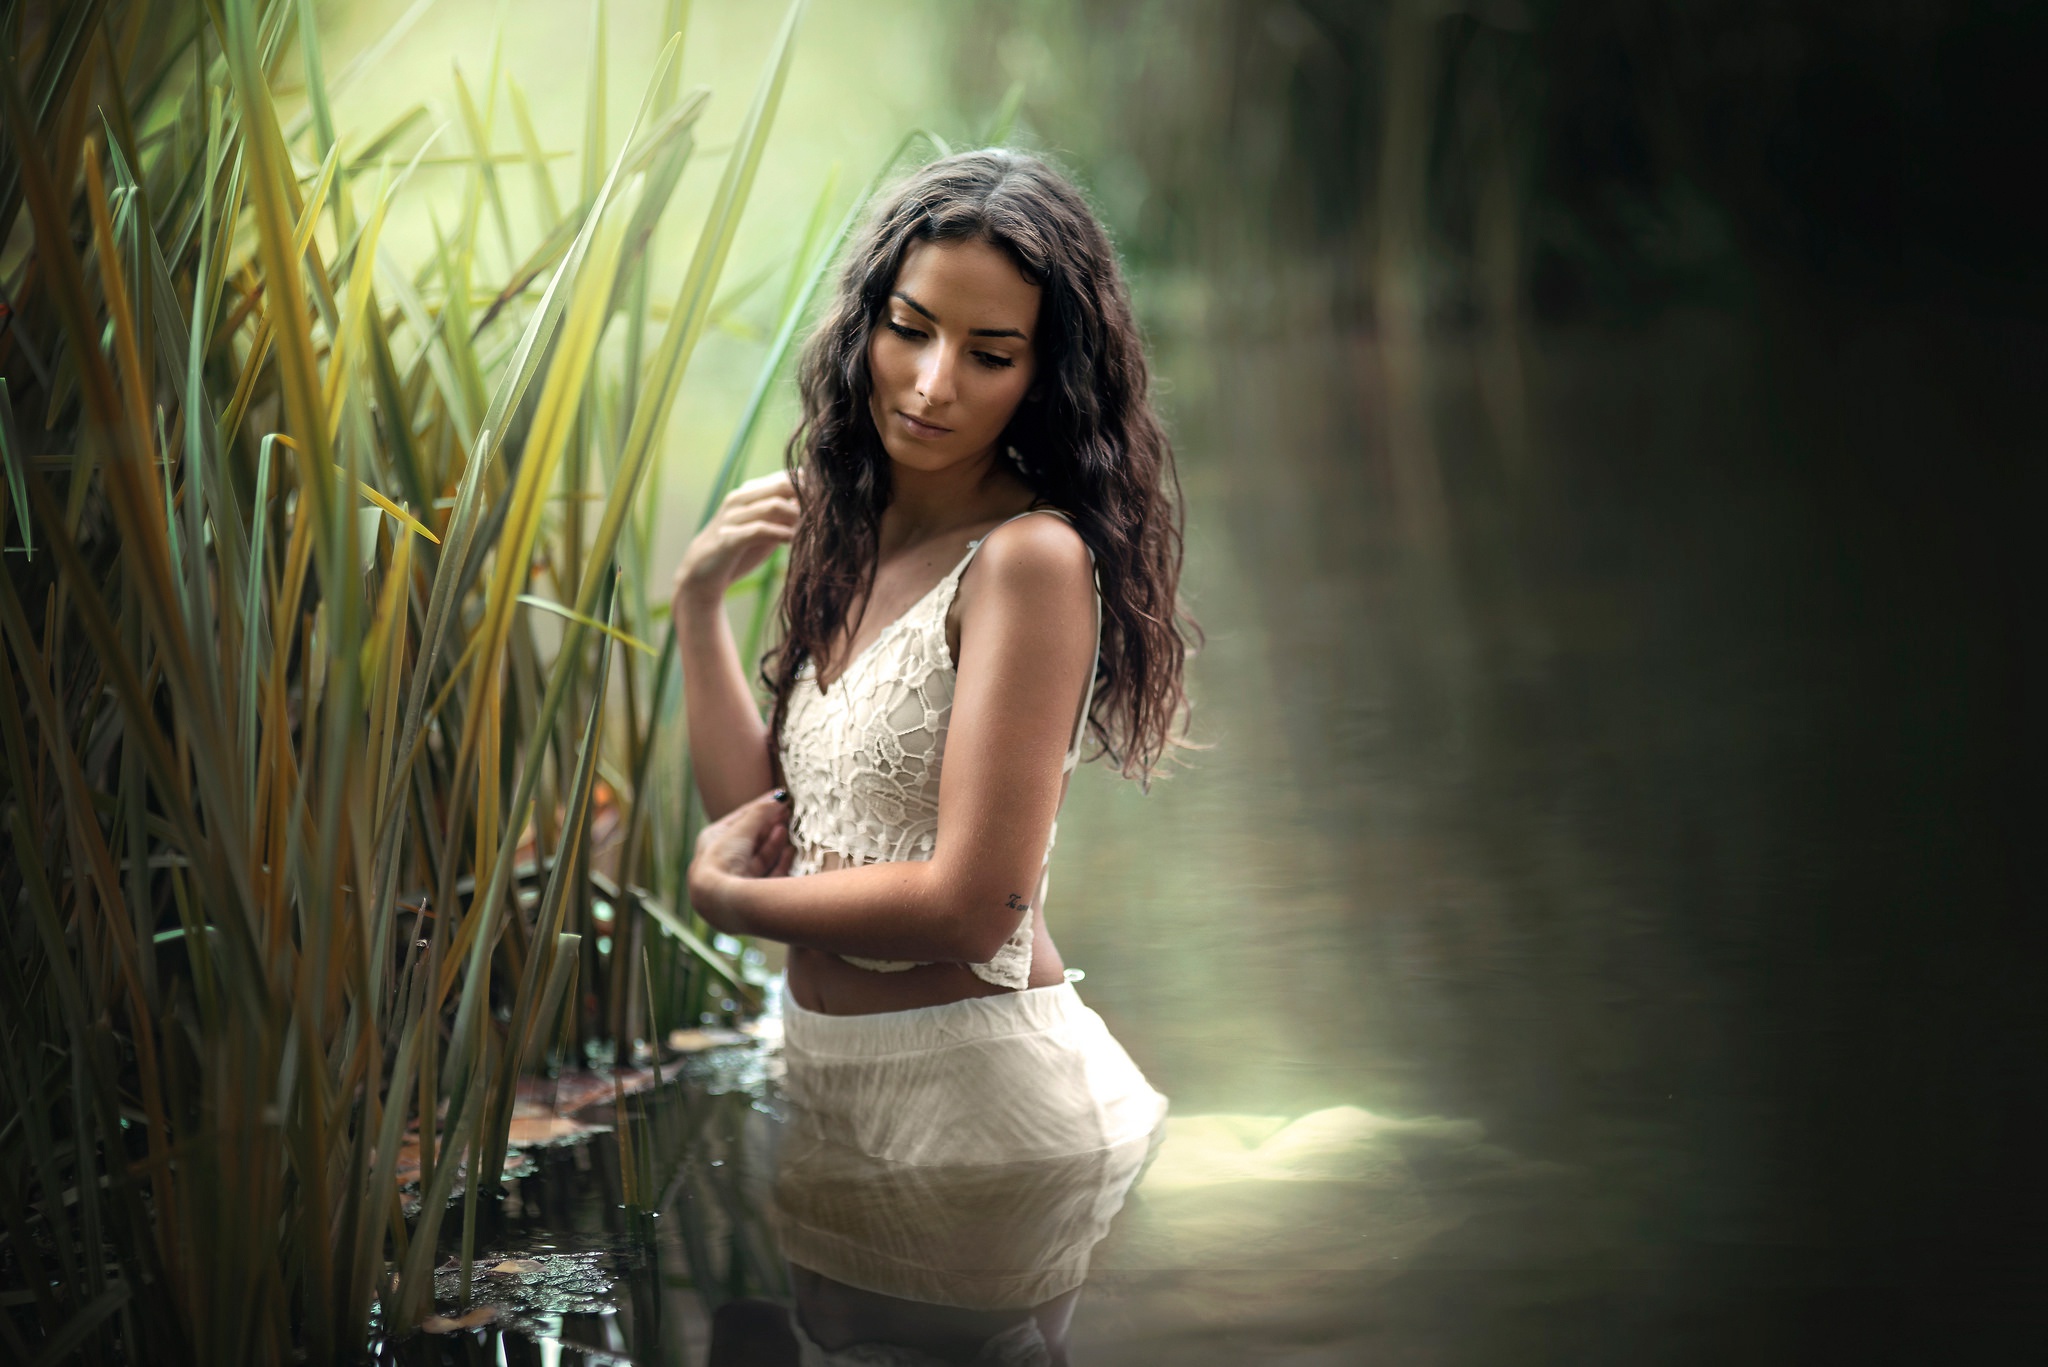 women, mood, black hair, model, reed, water for android